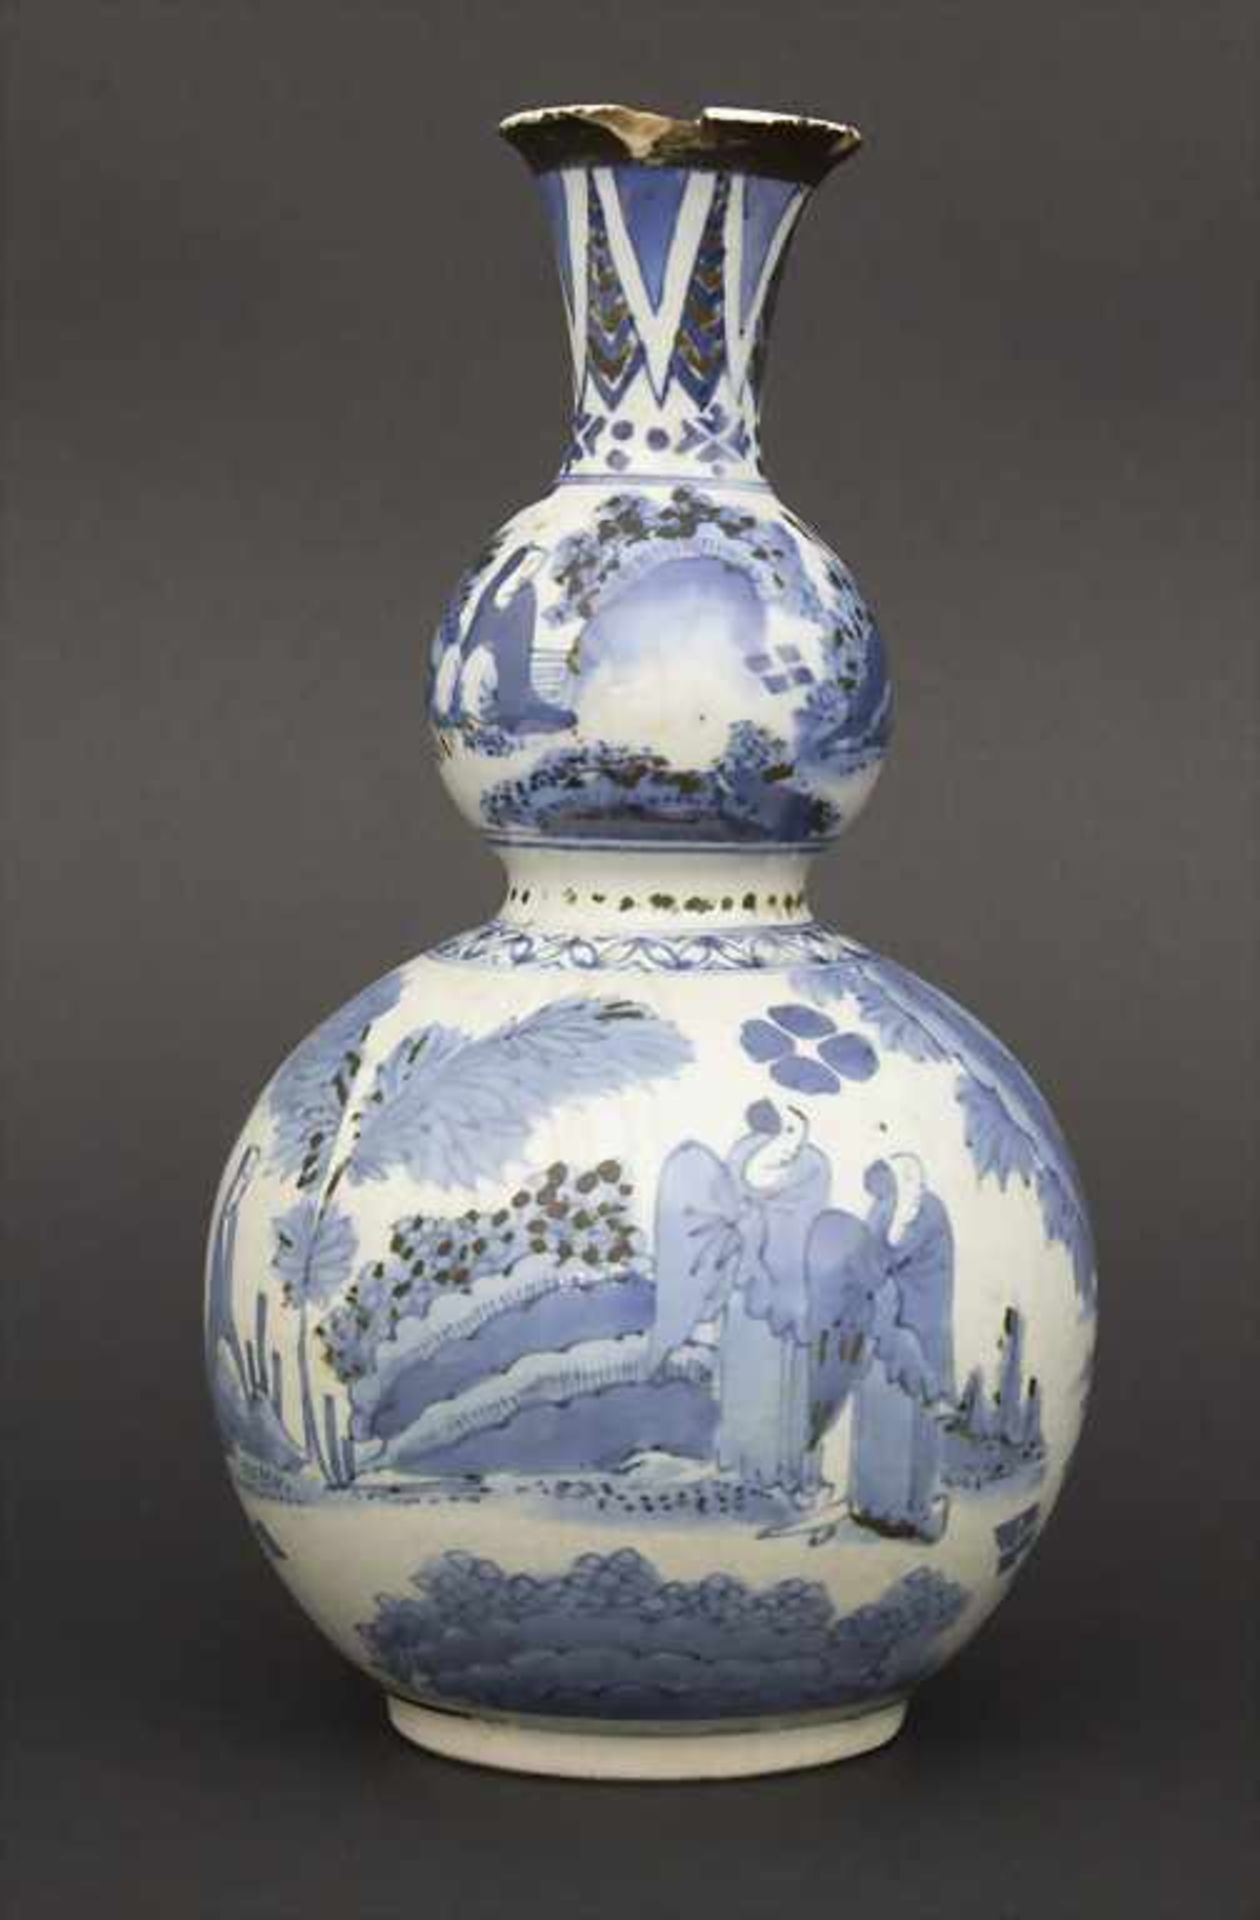 Ziervase / A vase, China, Ming/Qing- Dynastie